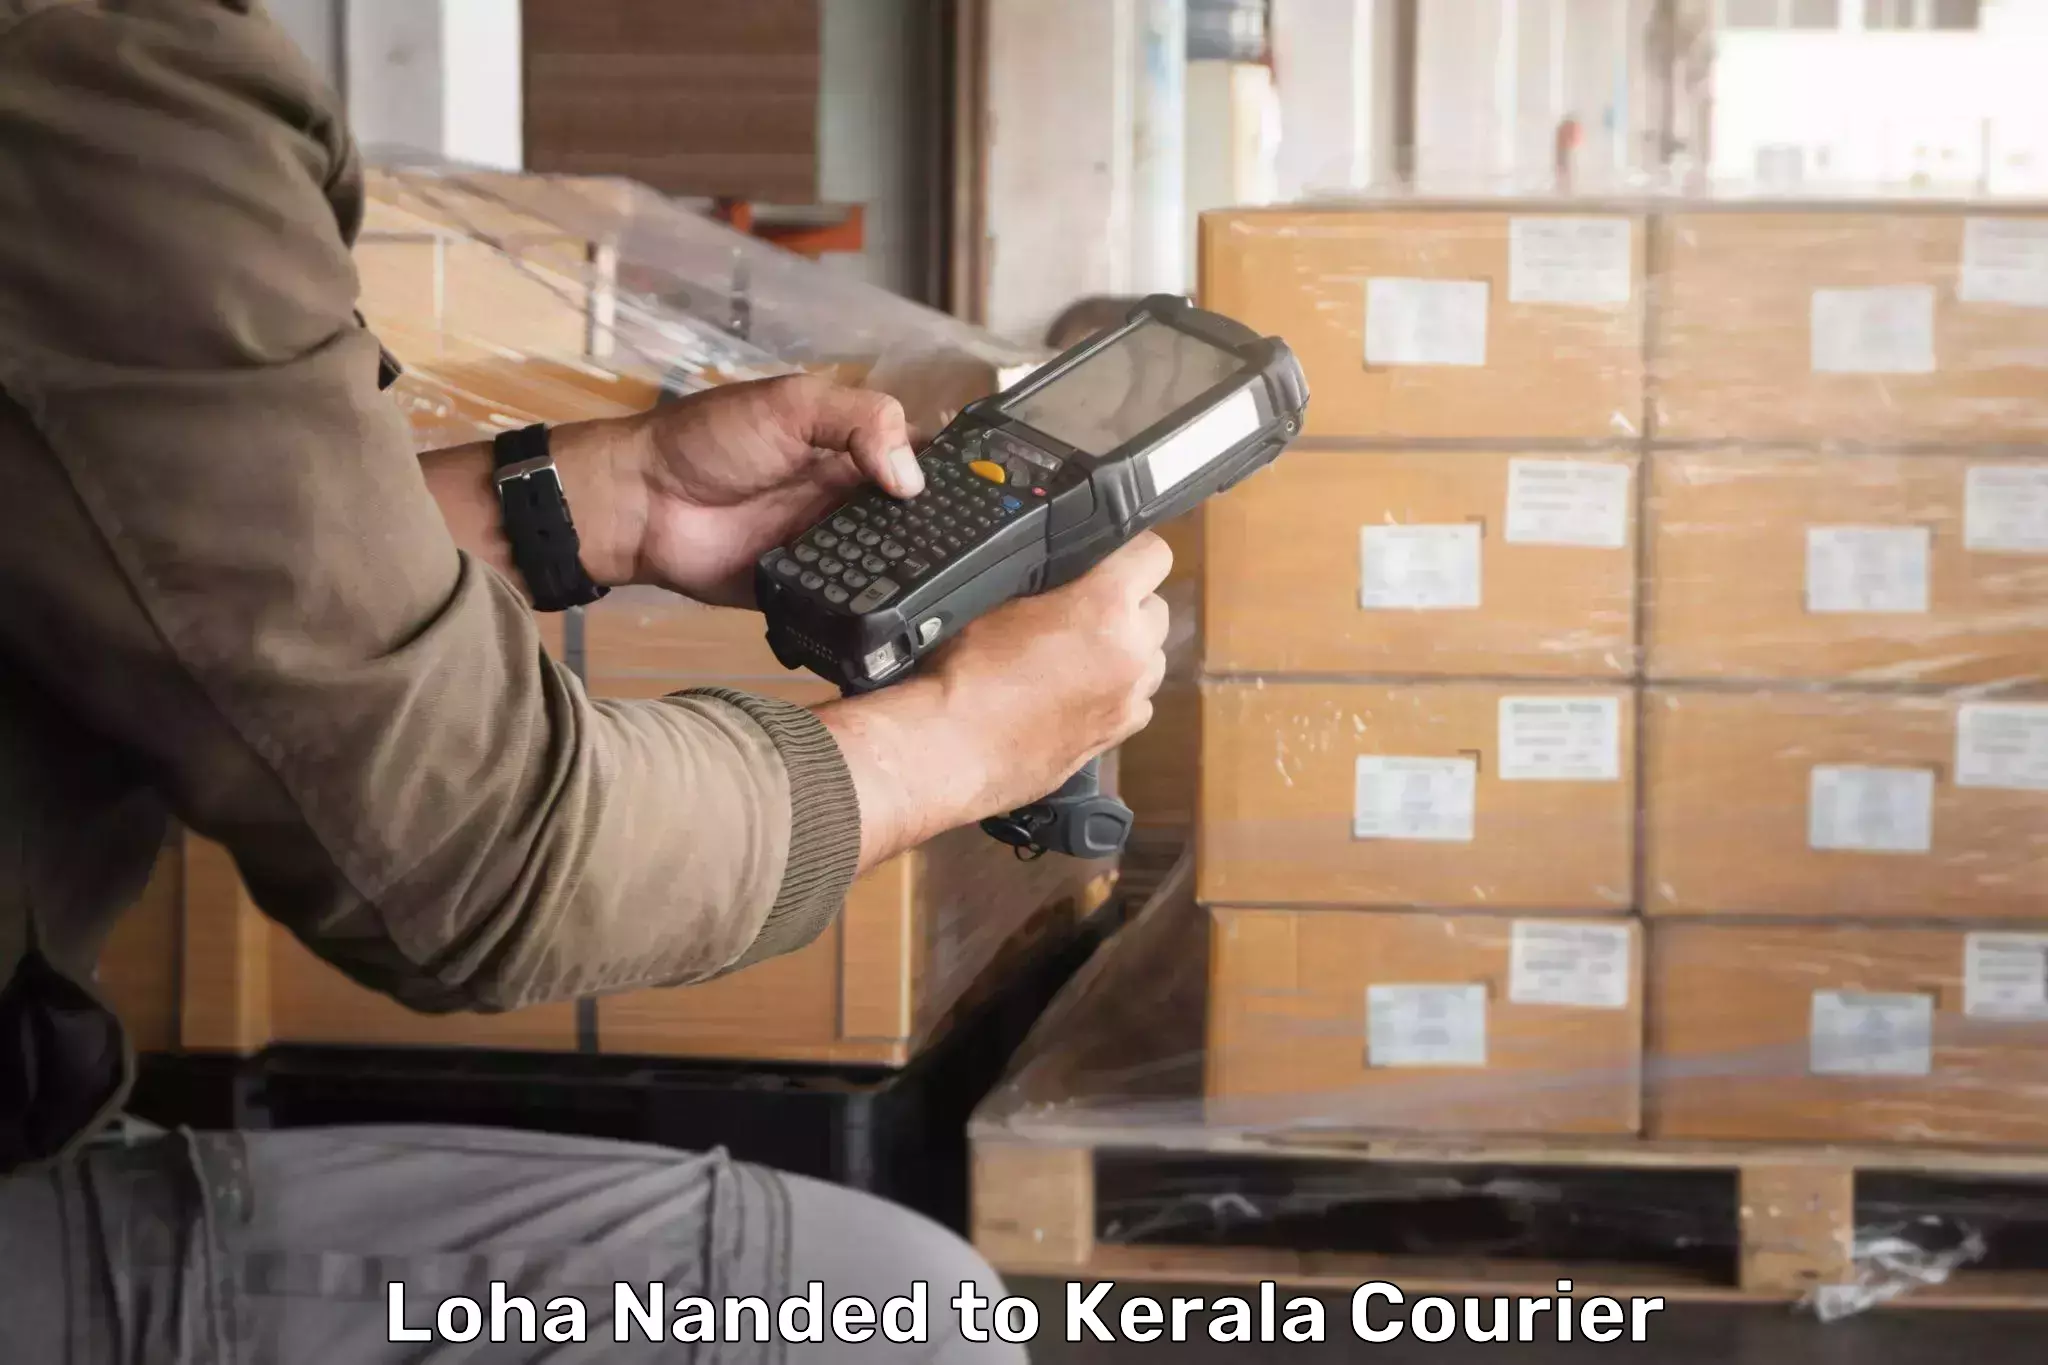 Courier service comparison in Loha Nanded to Haripad